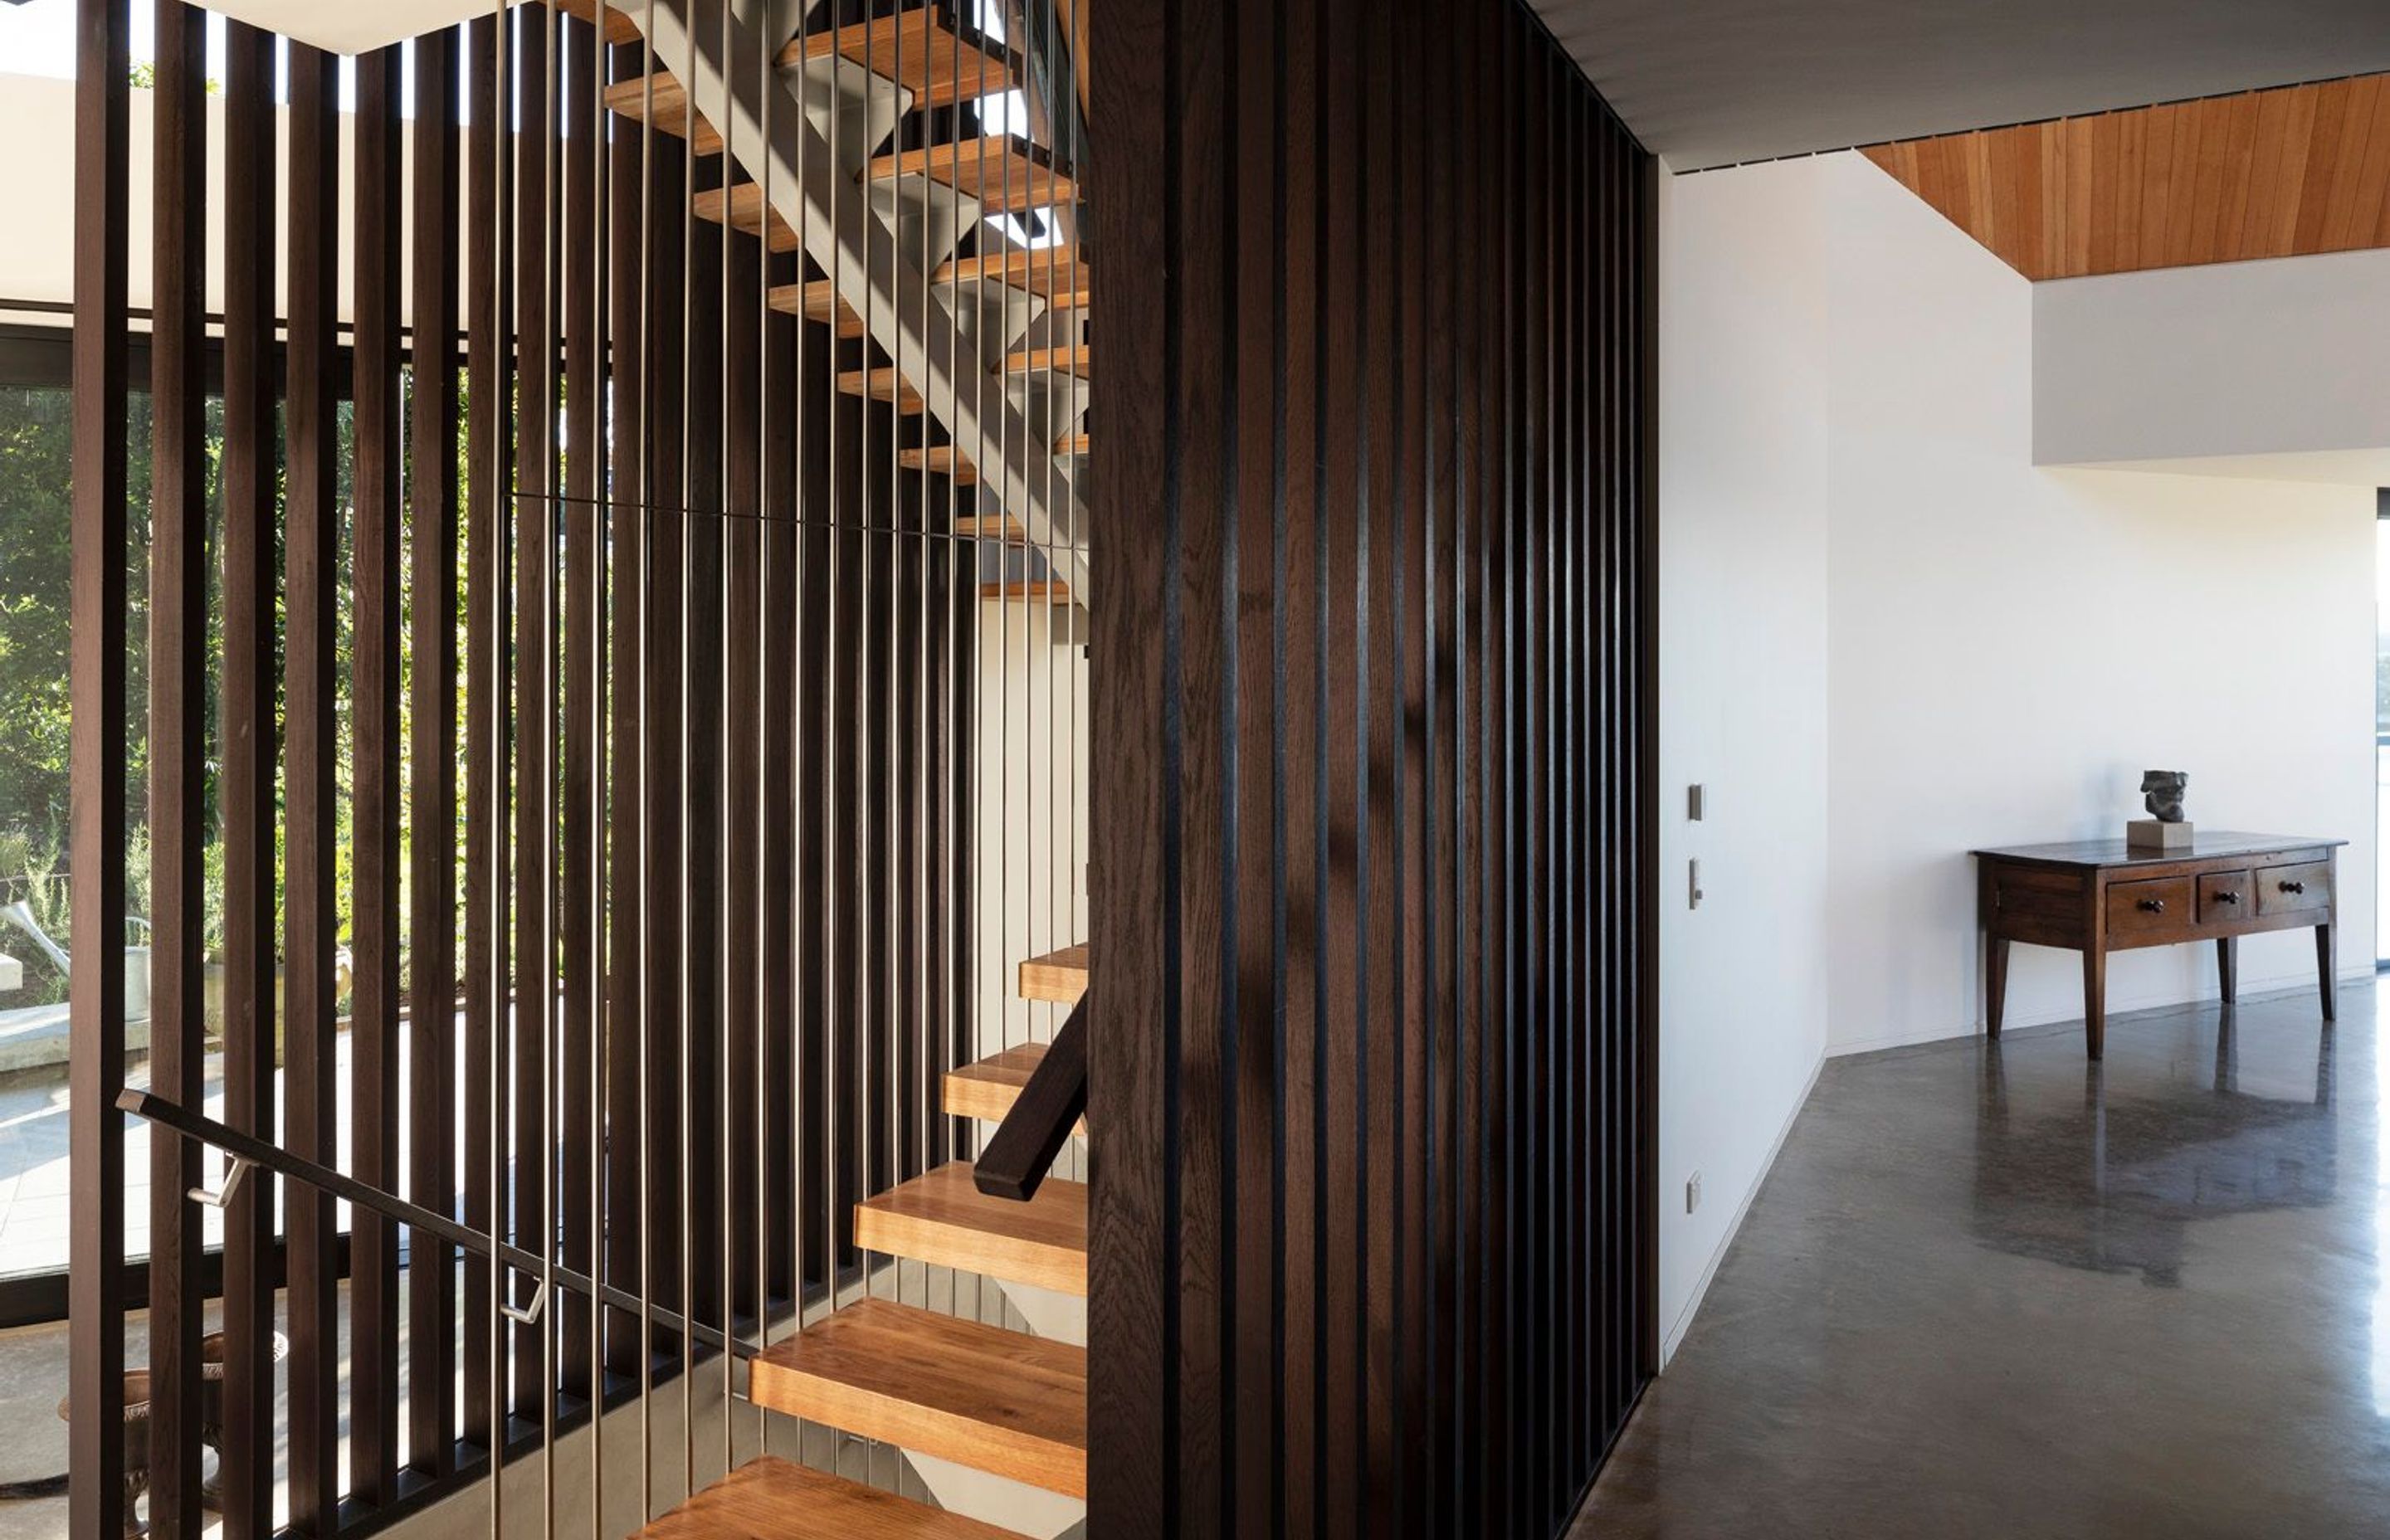 Entry to the house is situated five-metres below the main floor level. A three-storey staircase connects the entry level with the main floor as well as the mezzanine main bedroom.